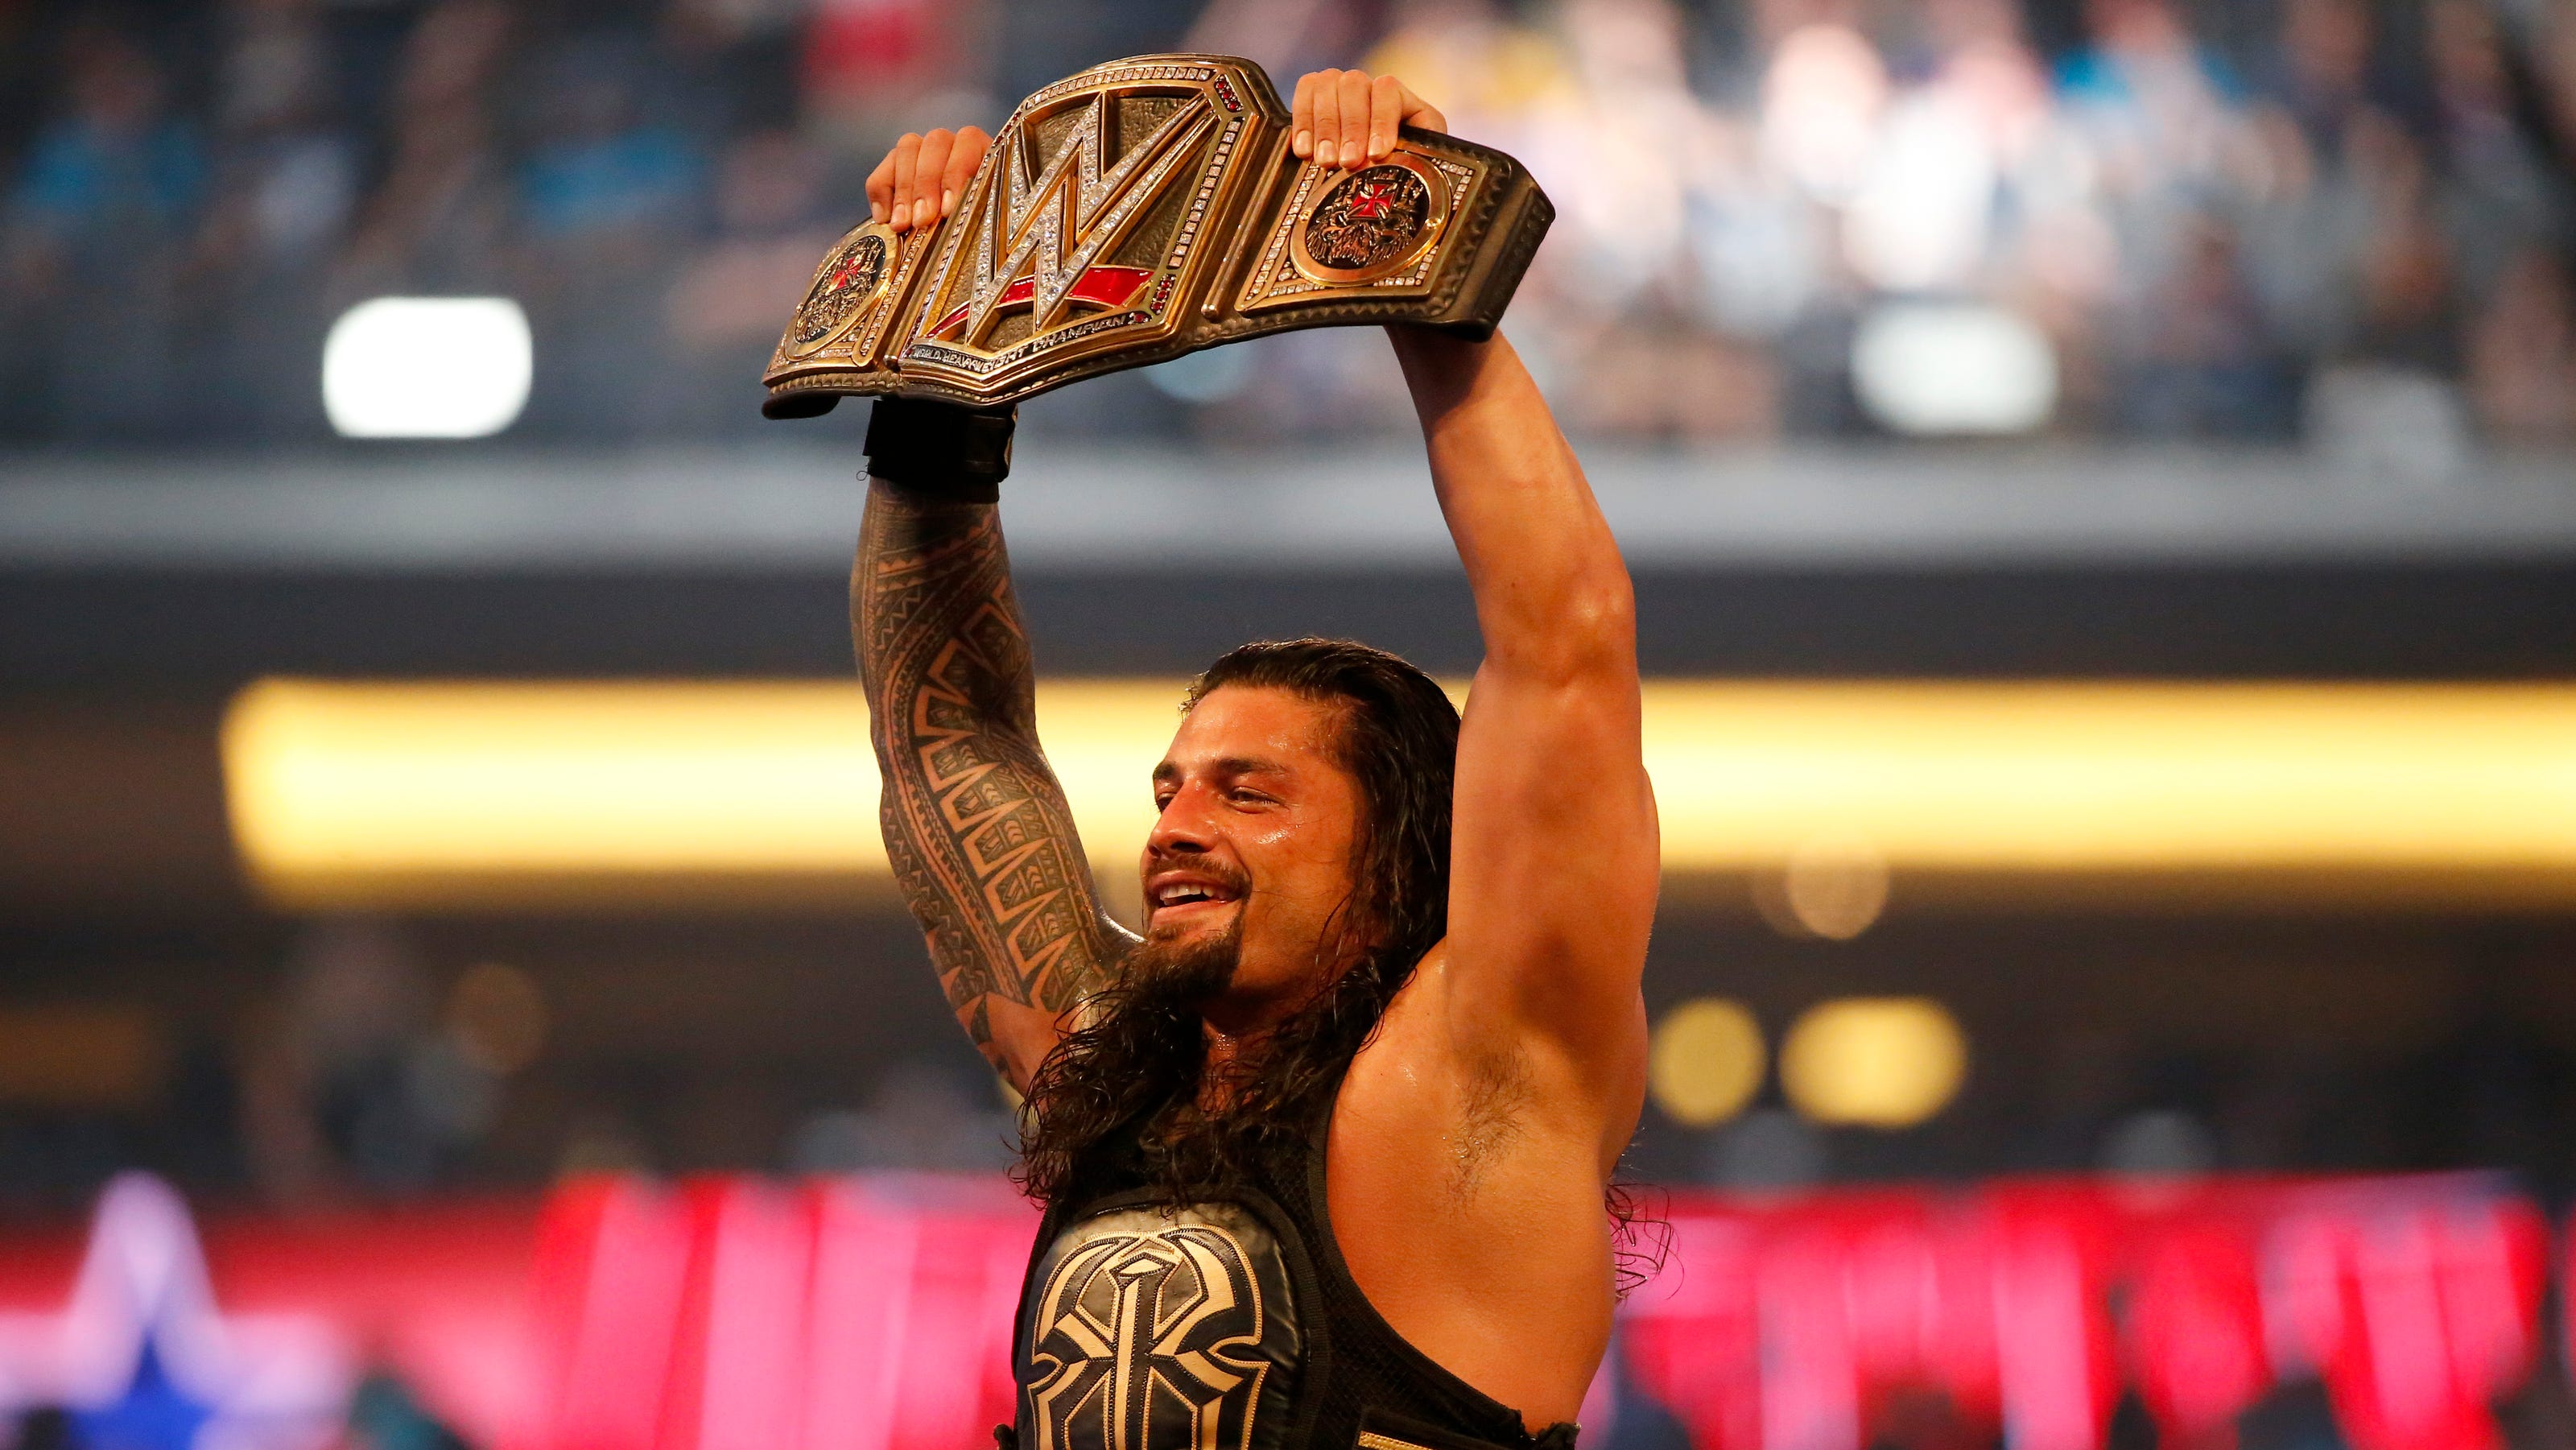 Roman Reigns Withdraws From Wwe Wrestlemania 36 Per Reports 